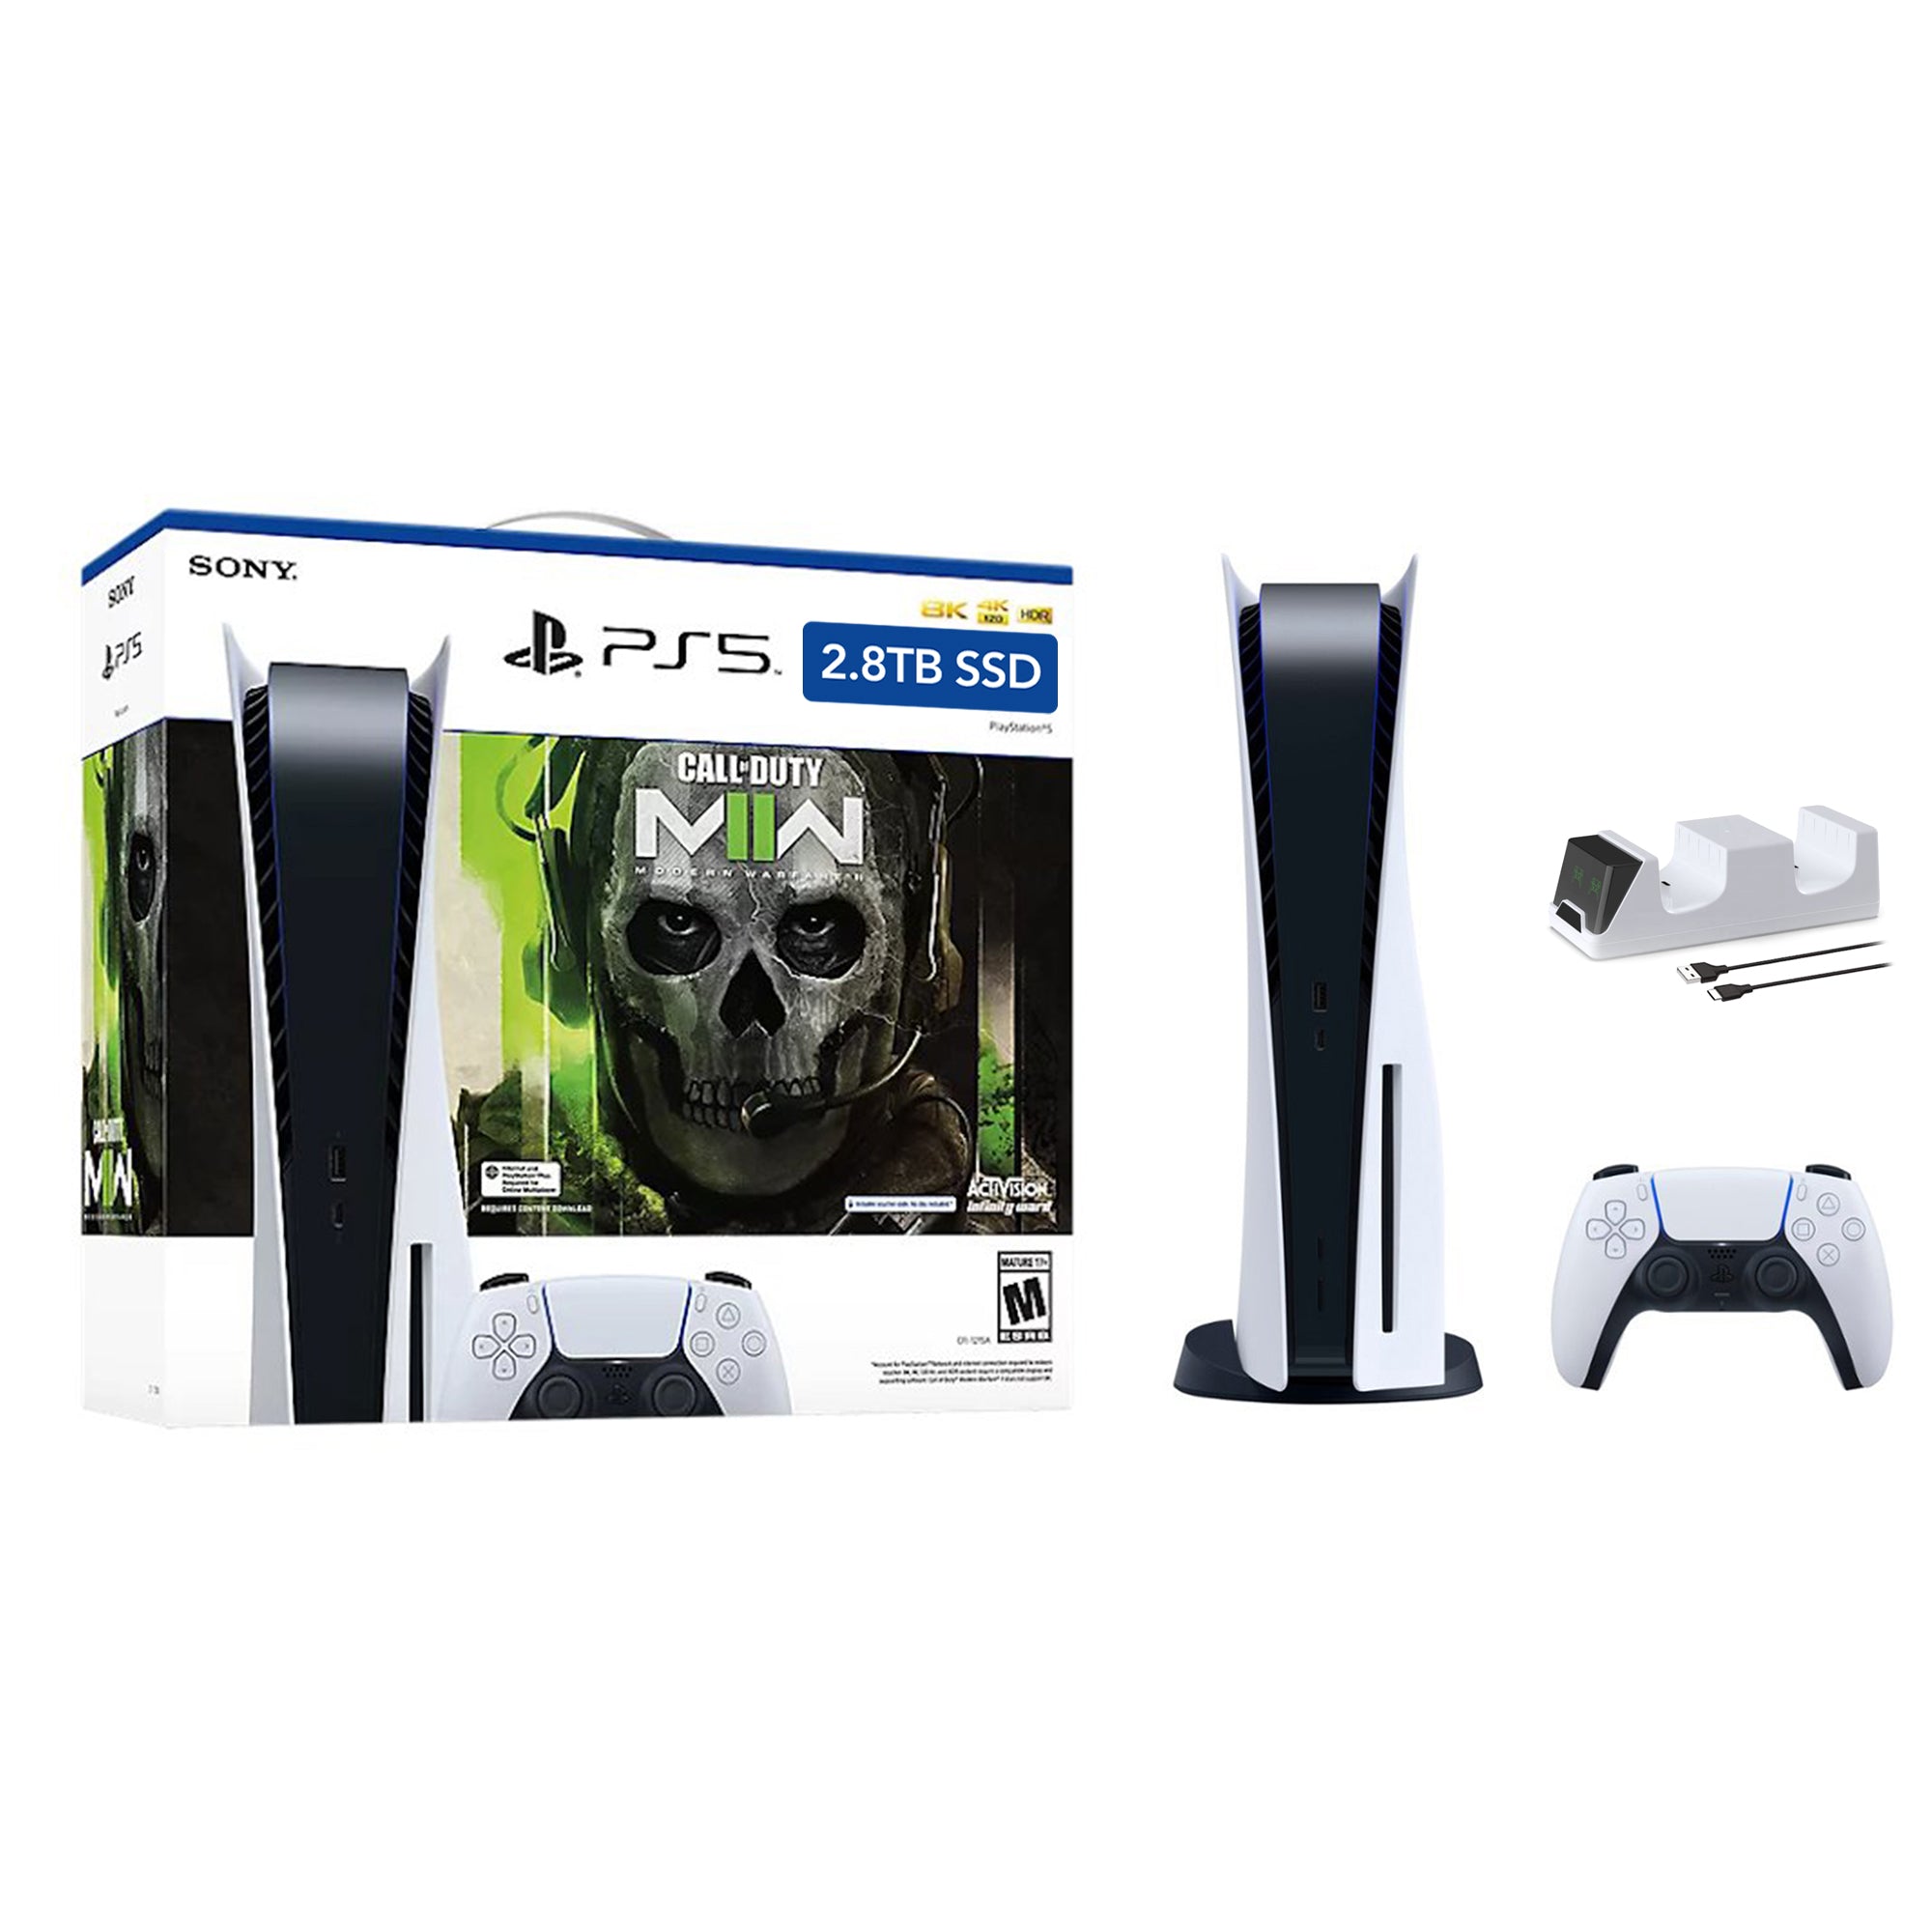 PlayStation 5 Upgraded 2.8TB Disc Edition Call of Duty Modern Warfare II Bundle and Mytrix Controller Charger - White, PS5 Gaming Console